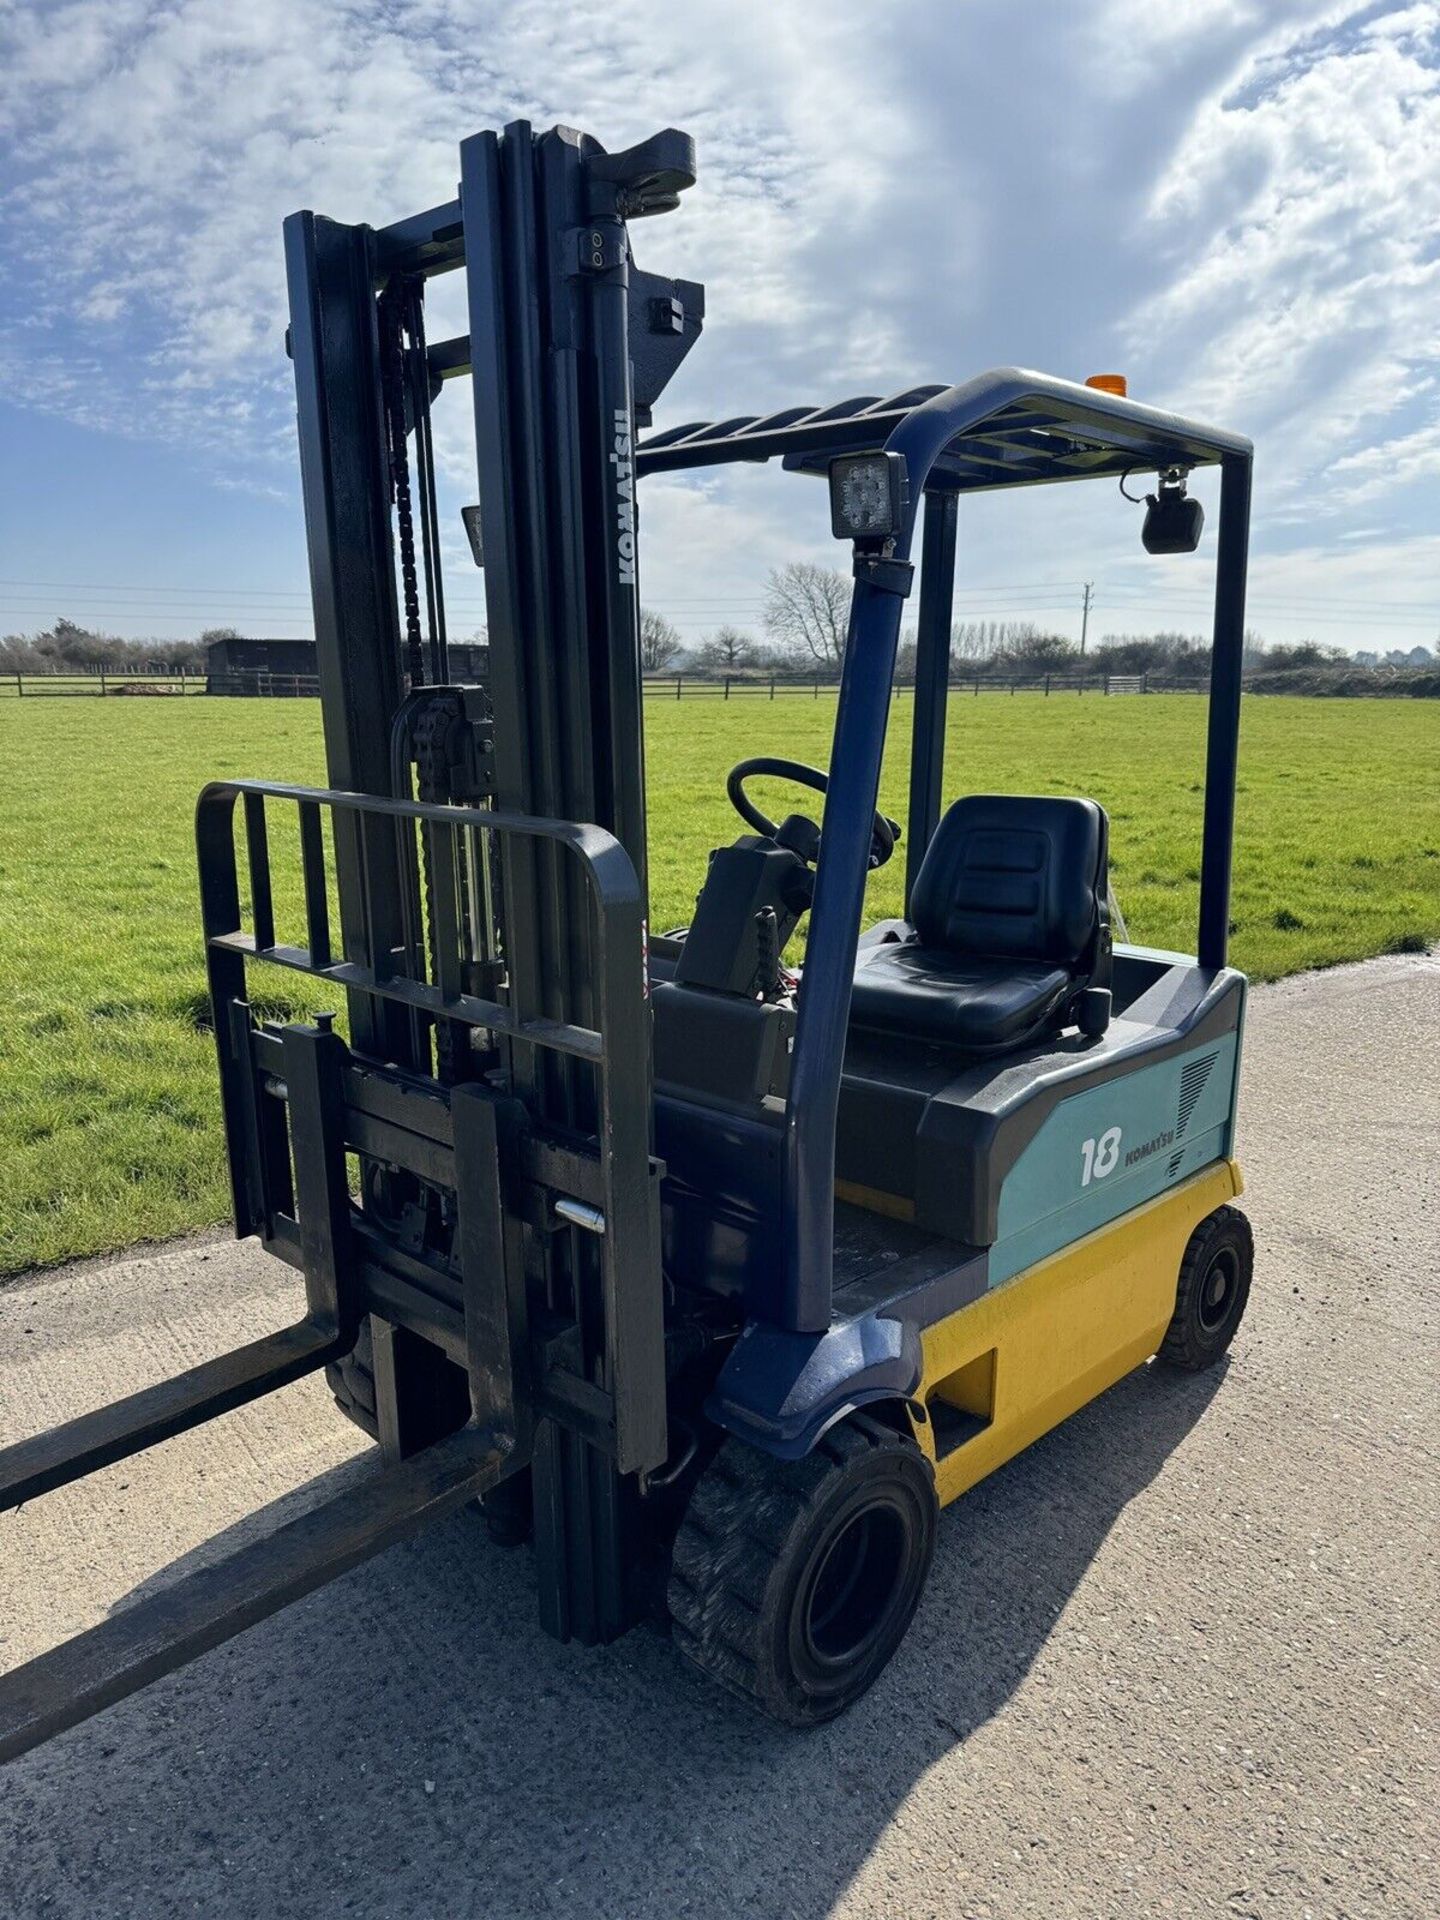 KOMATSU, 1.8 Tonne - Electric Forklift Truck (Container Spec) - Image 5 of 5